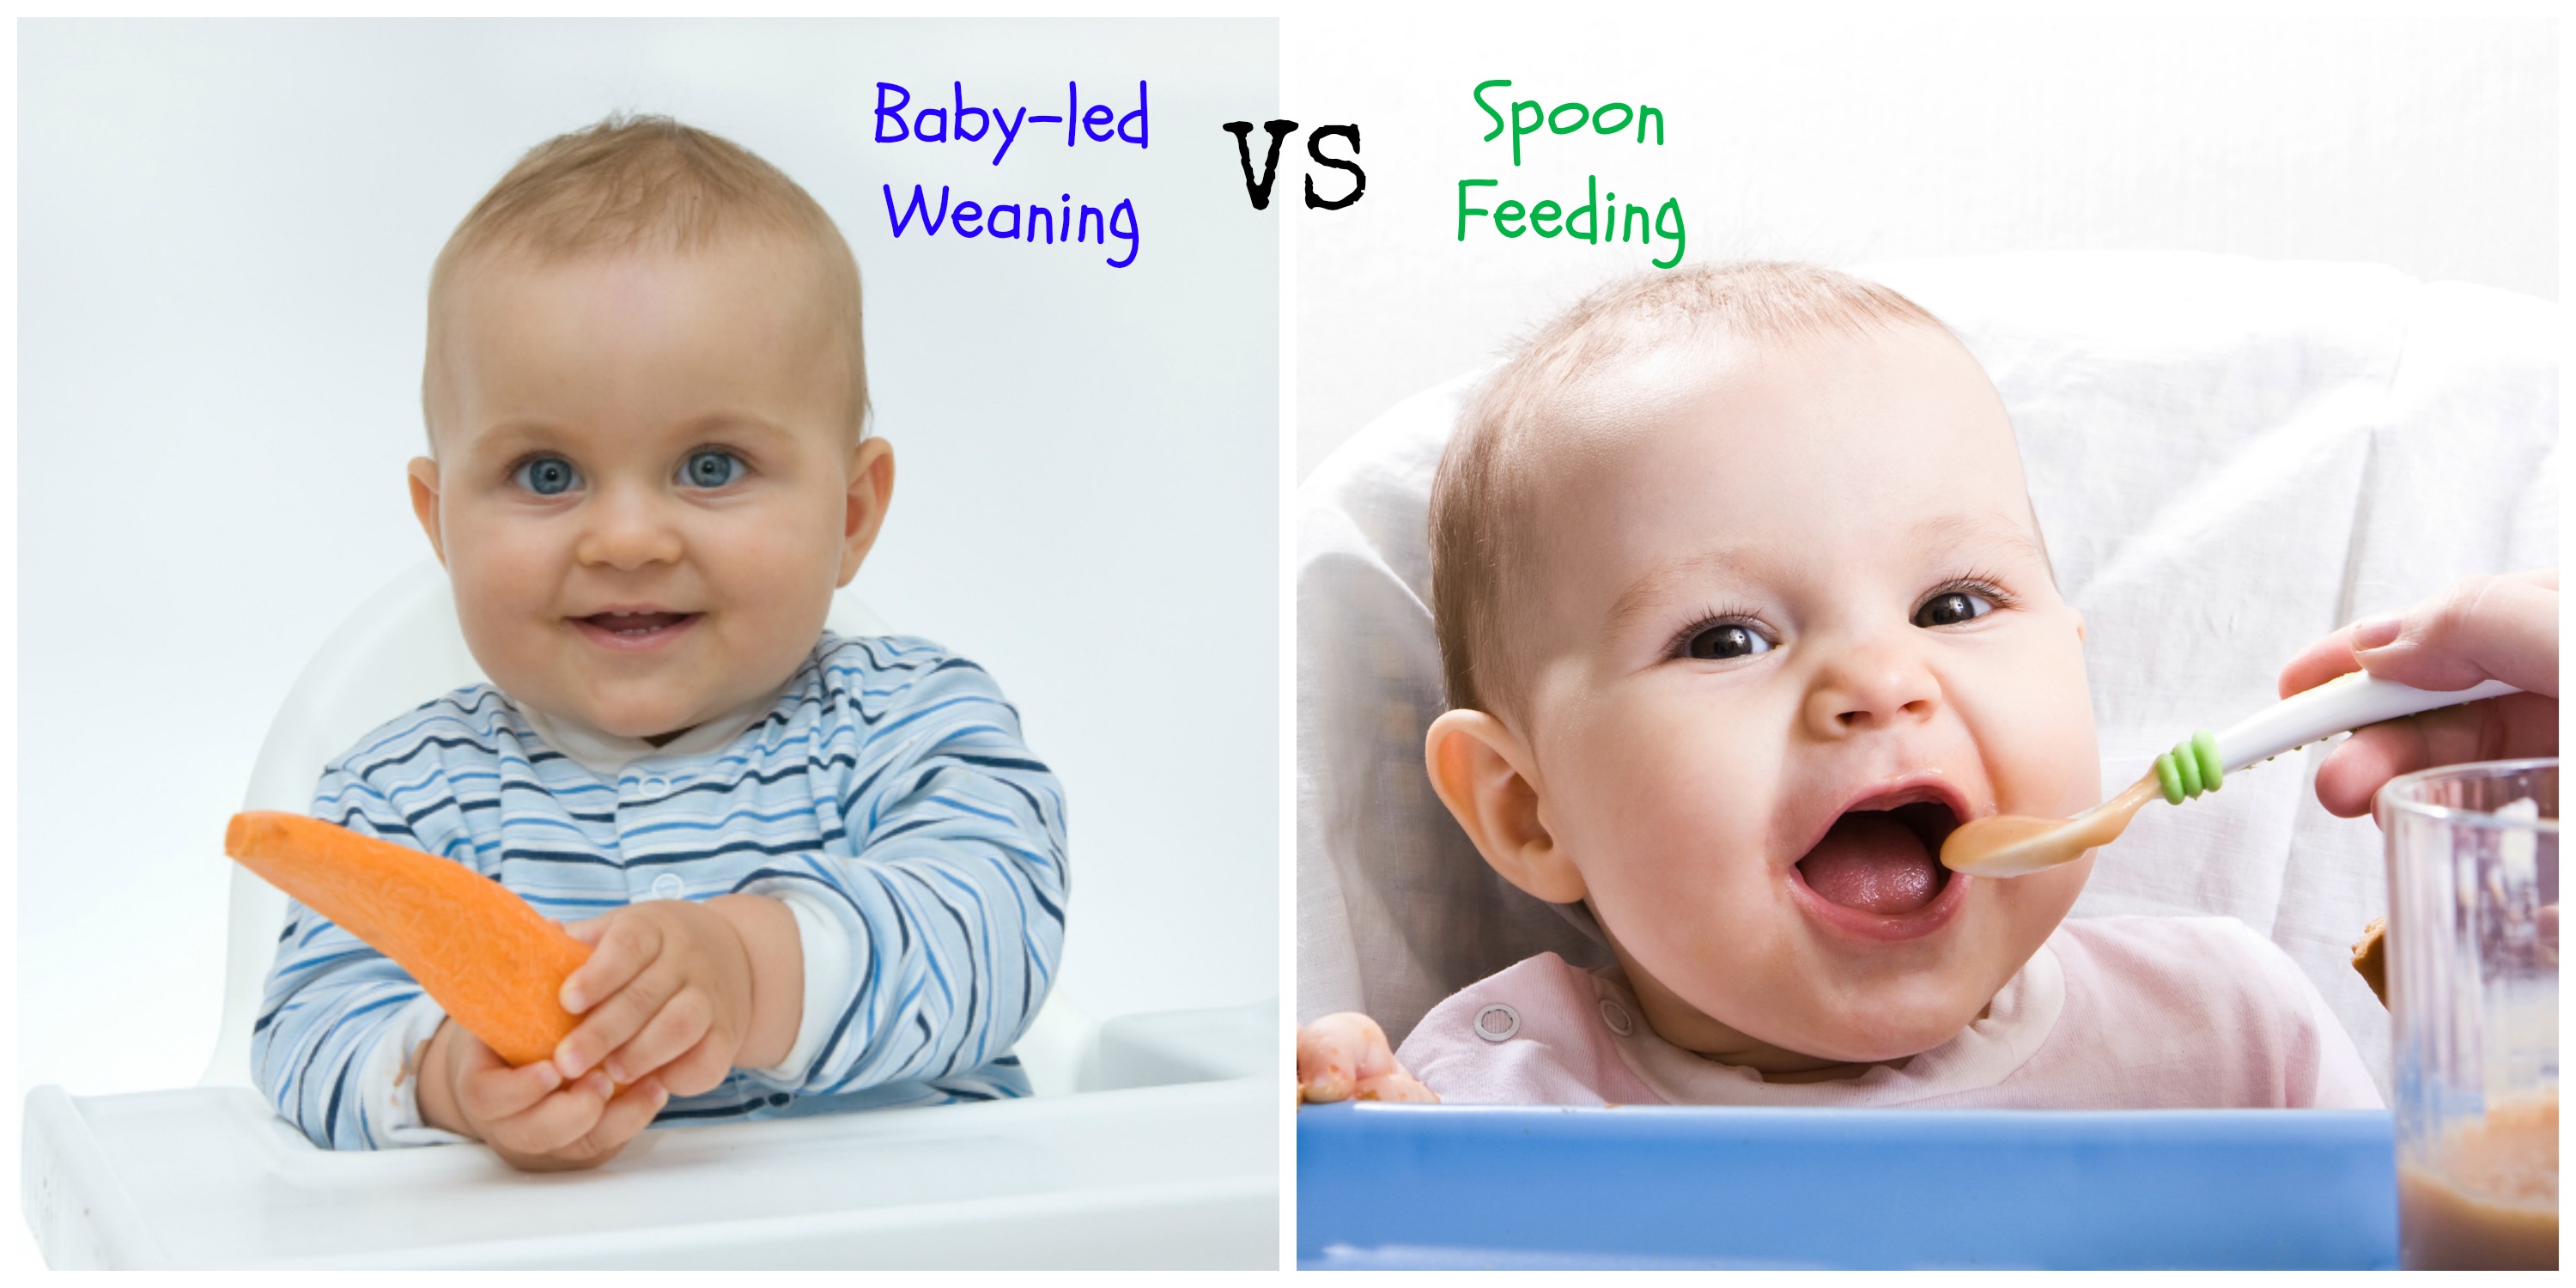 Baby-Led Weaning: How to Teach Baby How to Use Spoon